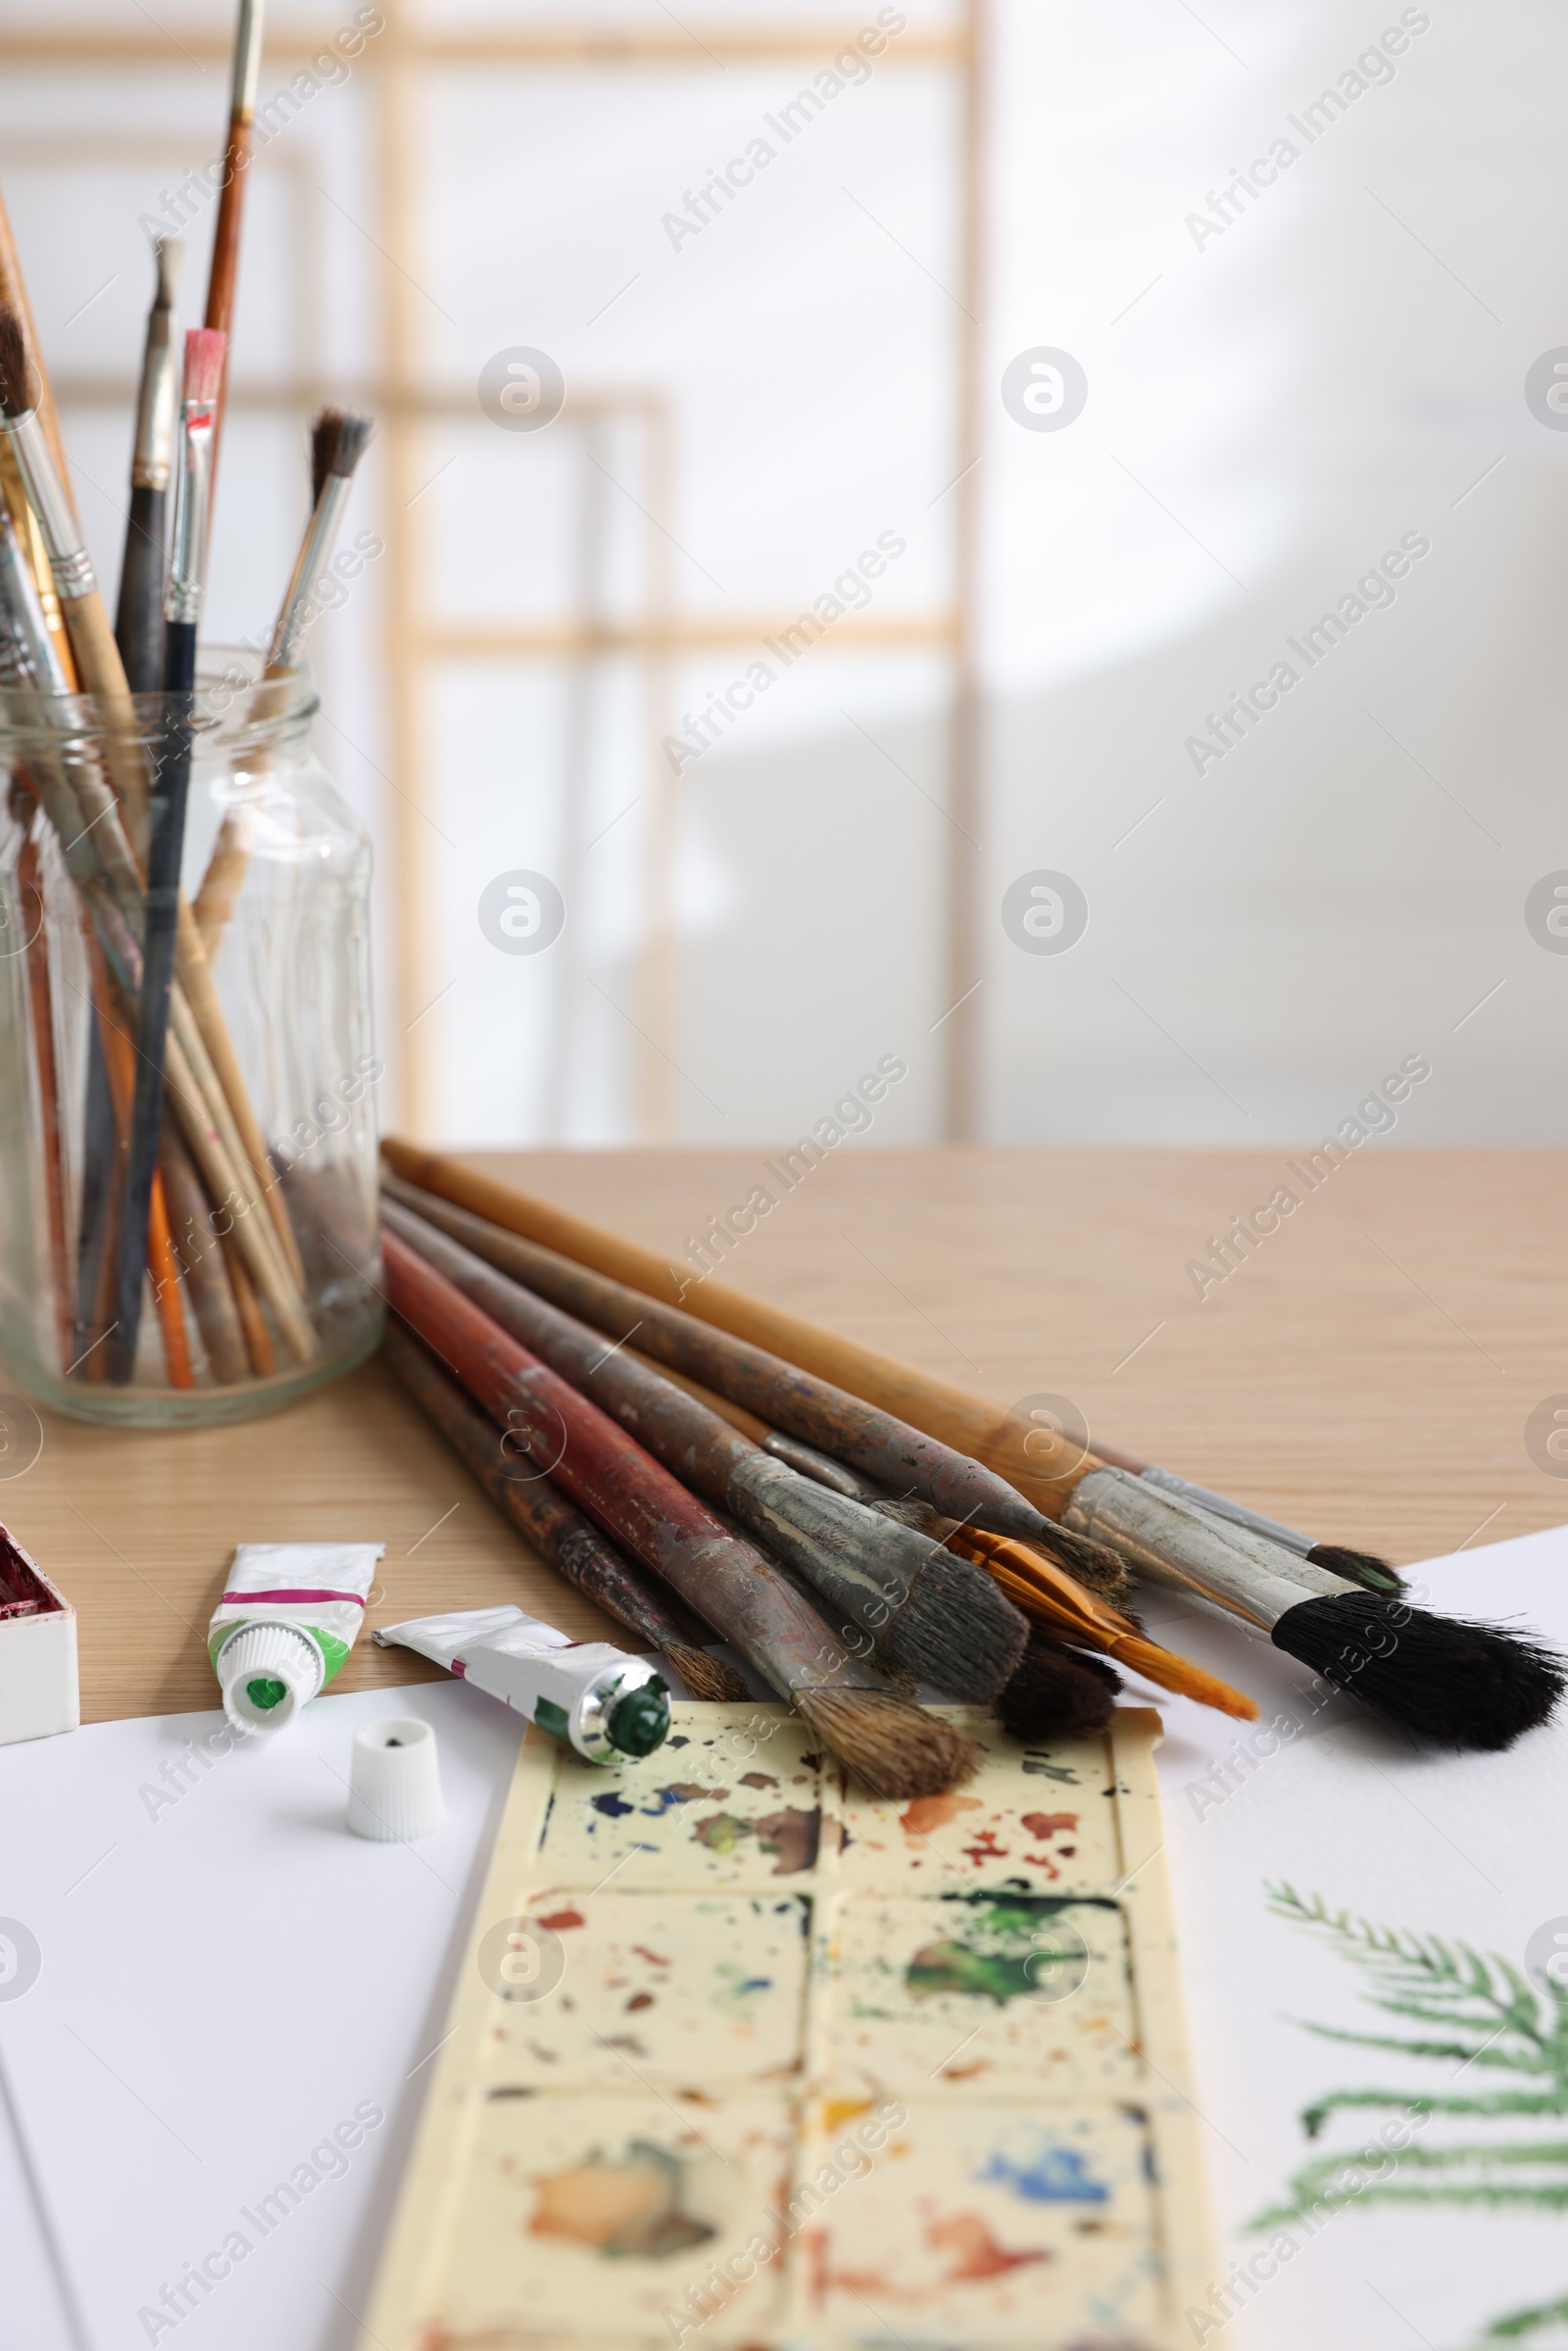 Photo of Different brushes, colorful paints, palette and drawing on table in studio. Artist's workplace